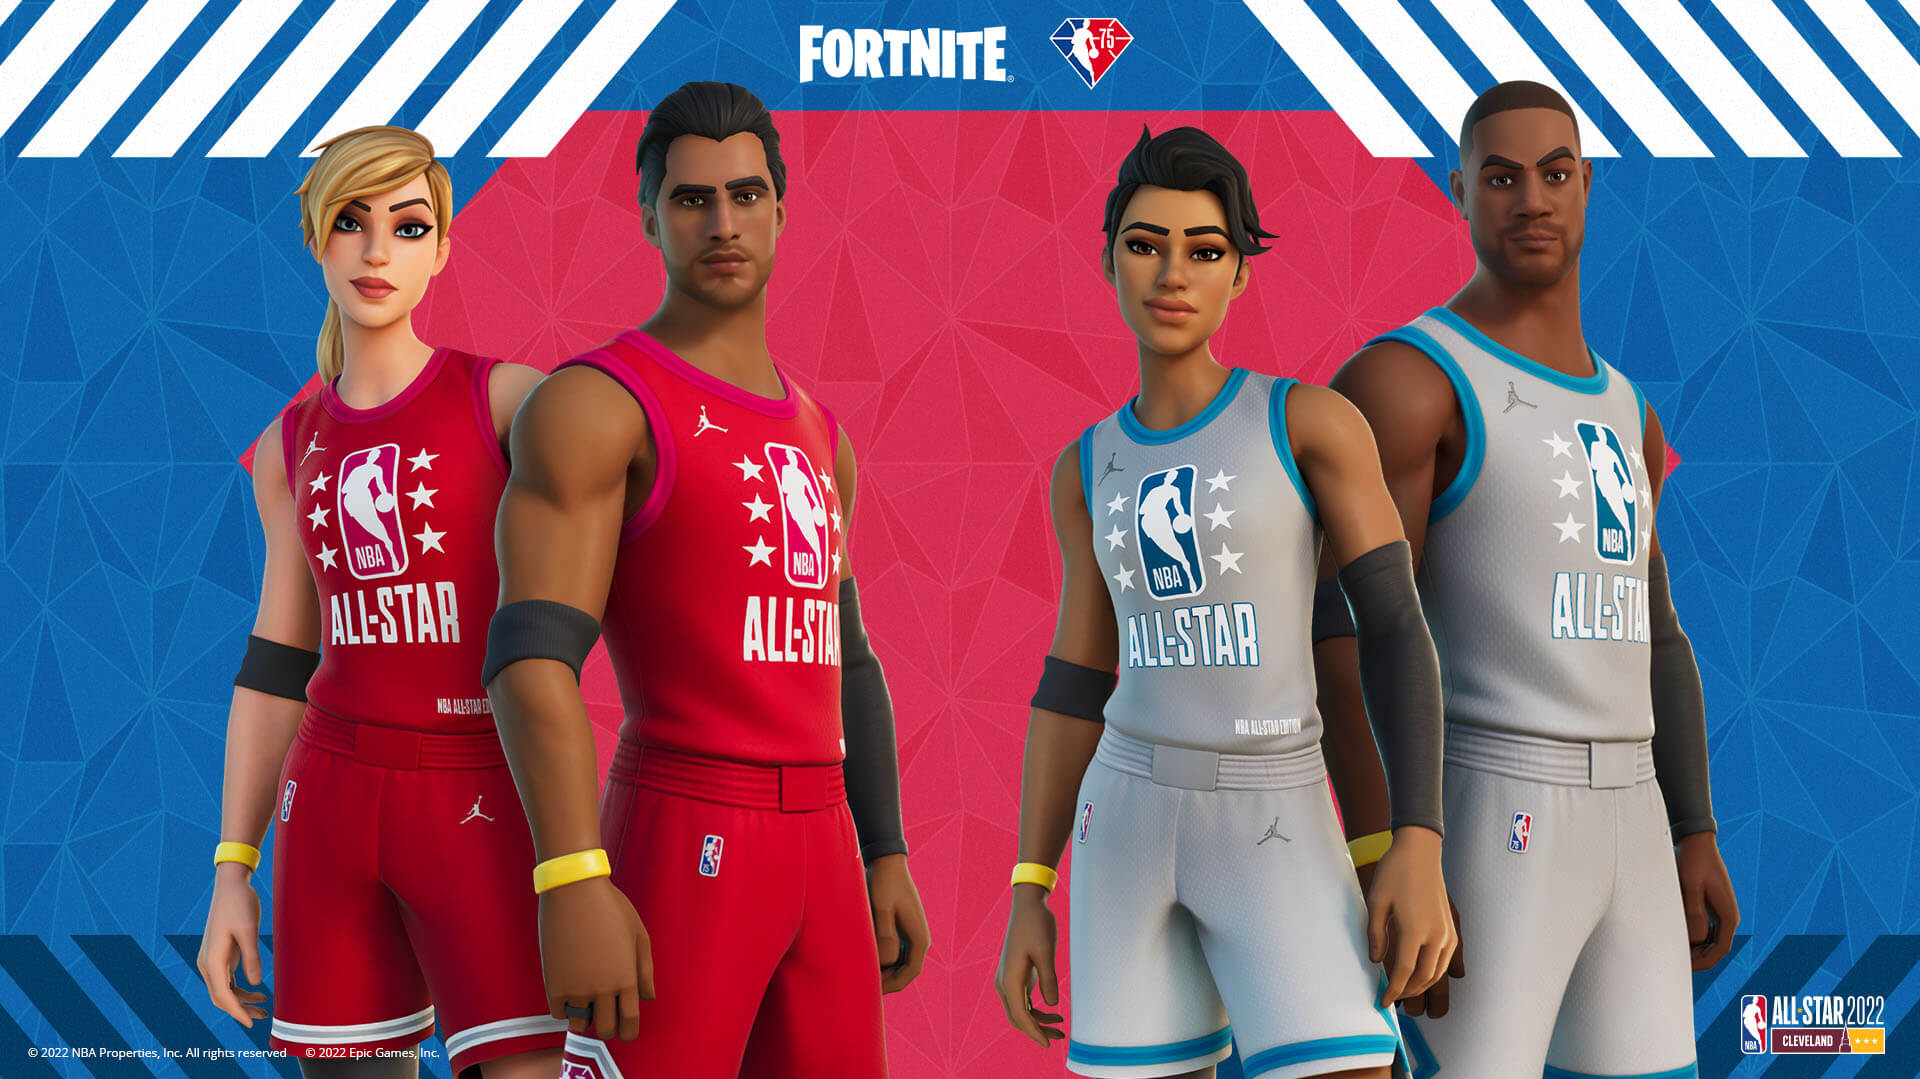 The Nba Returns To Fortnite New Quests And Cosmetics Available